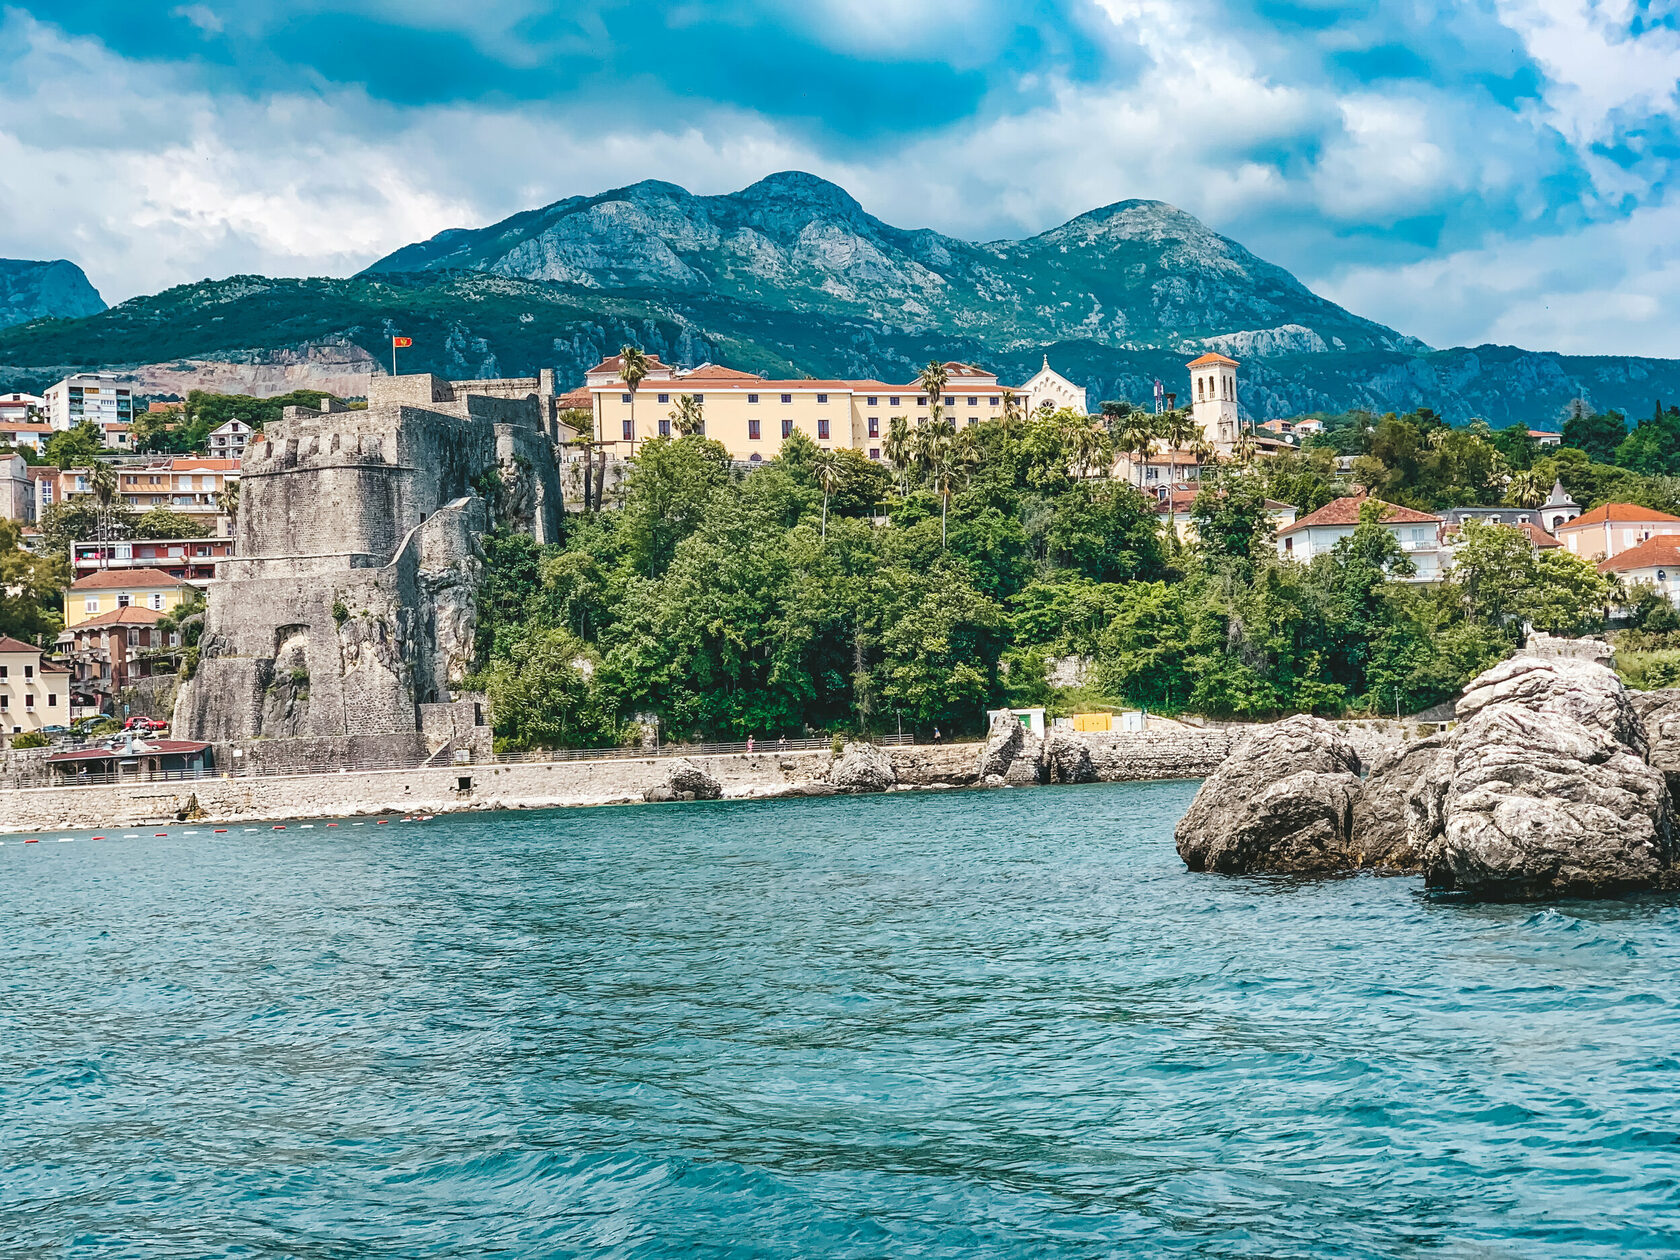 Where-to-go-in-Montenegro-6-day-trips-from-dubrovnik-to-montenegro